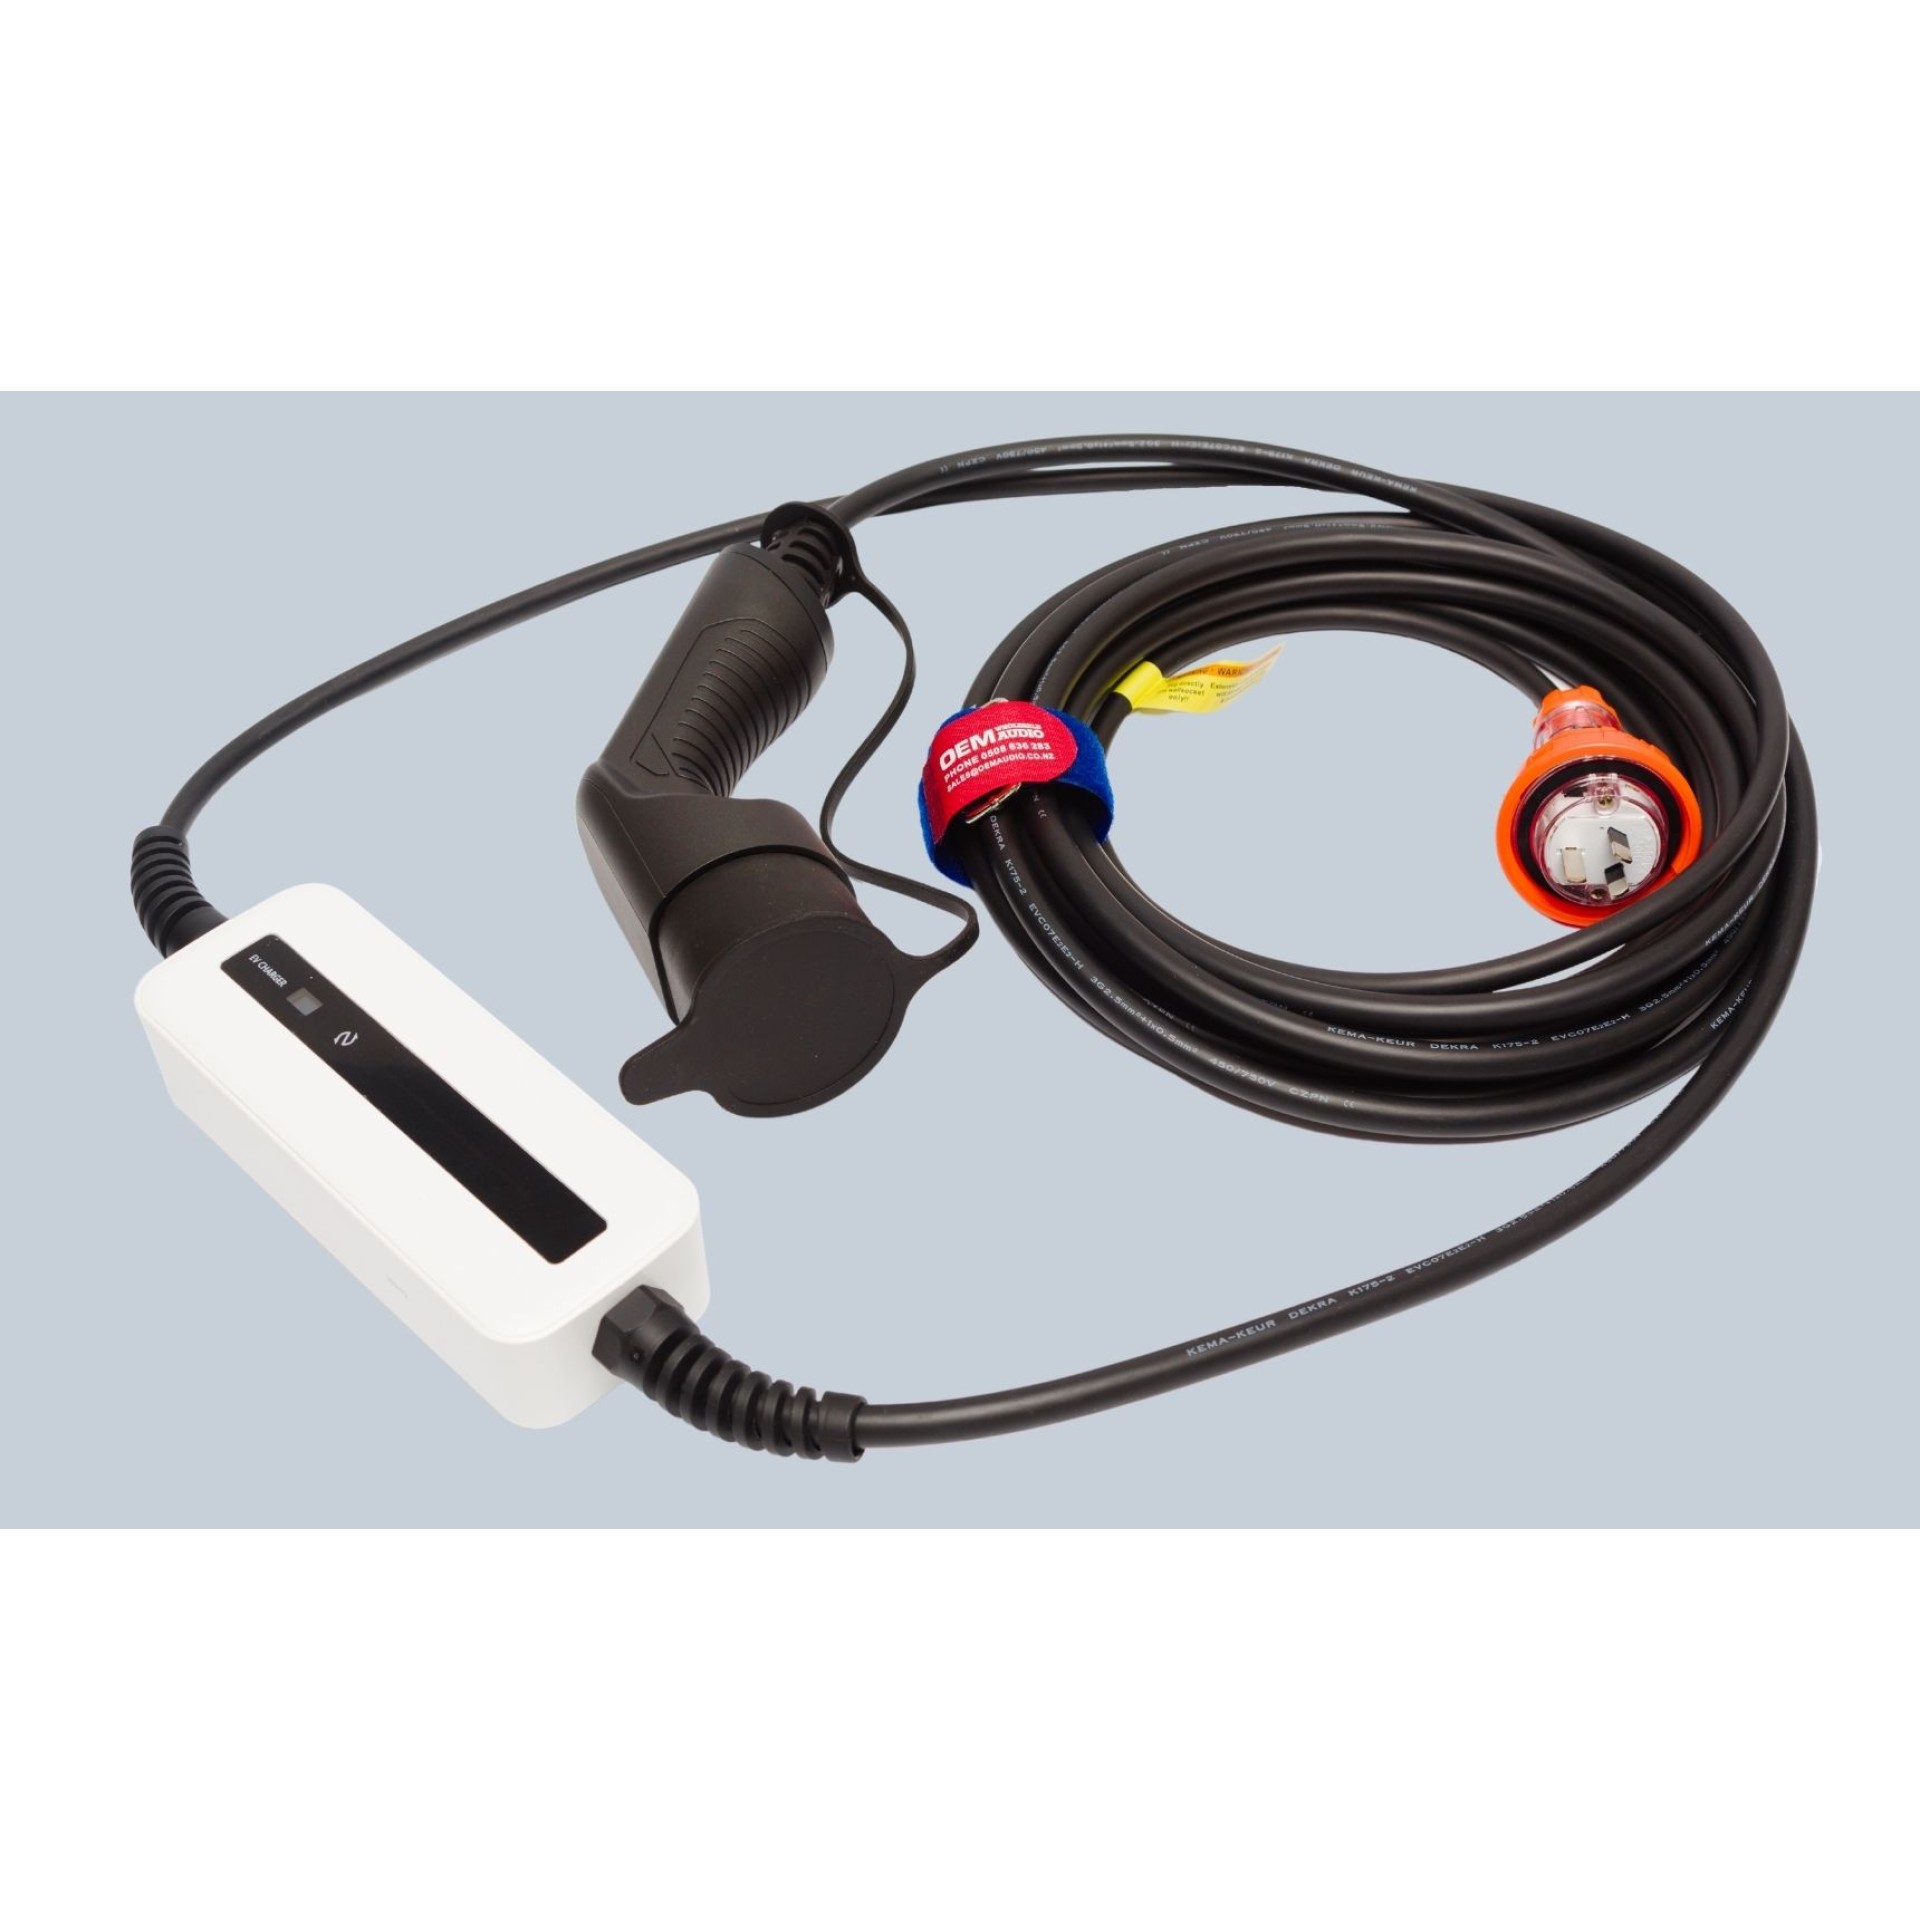 Electric Vehicle NZ - Classic Plus Type 2, 8 Amp EV Charger